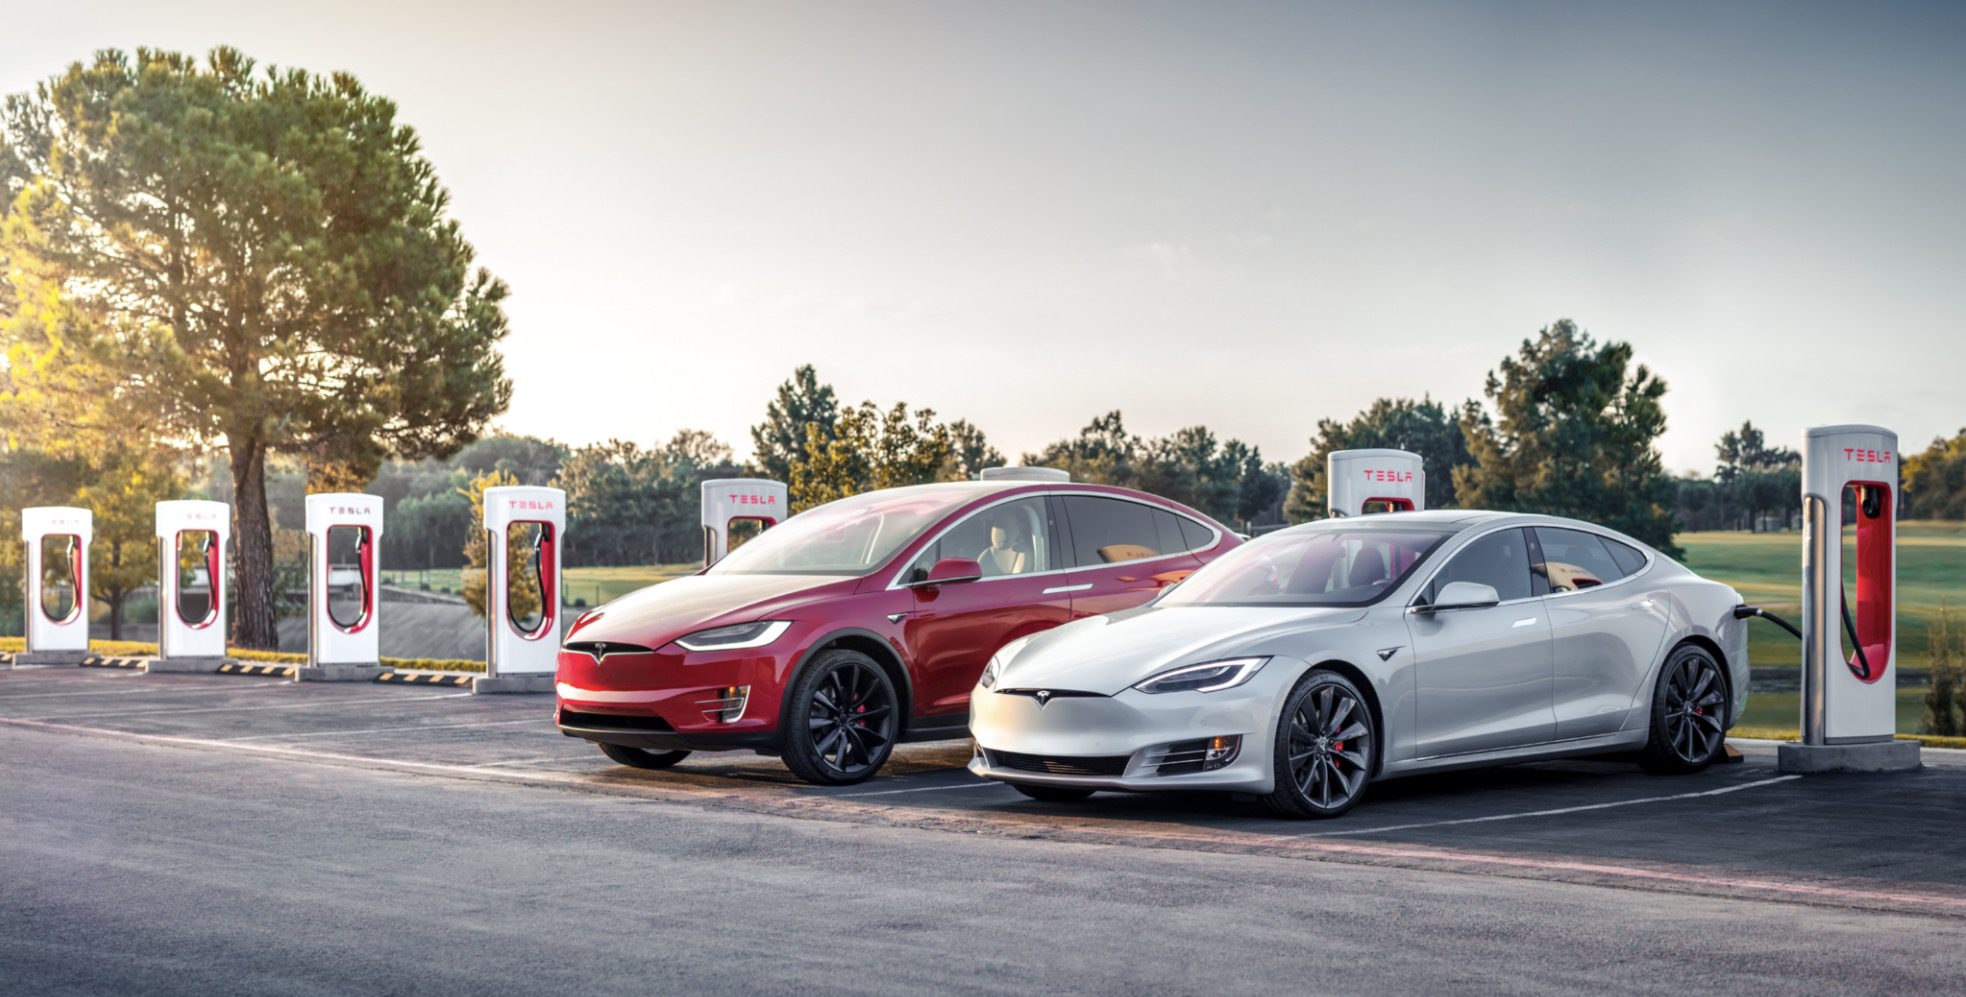 Tesla is ending the free unlimited Supercharging era today - what